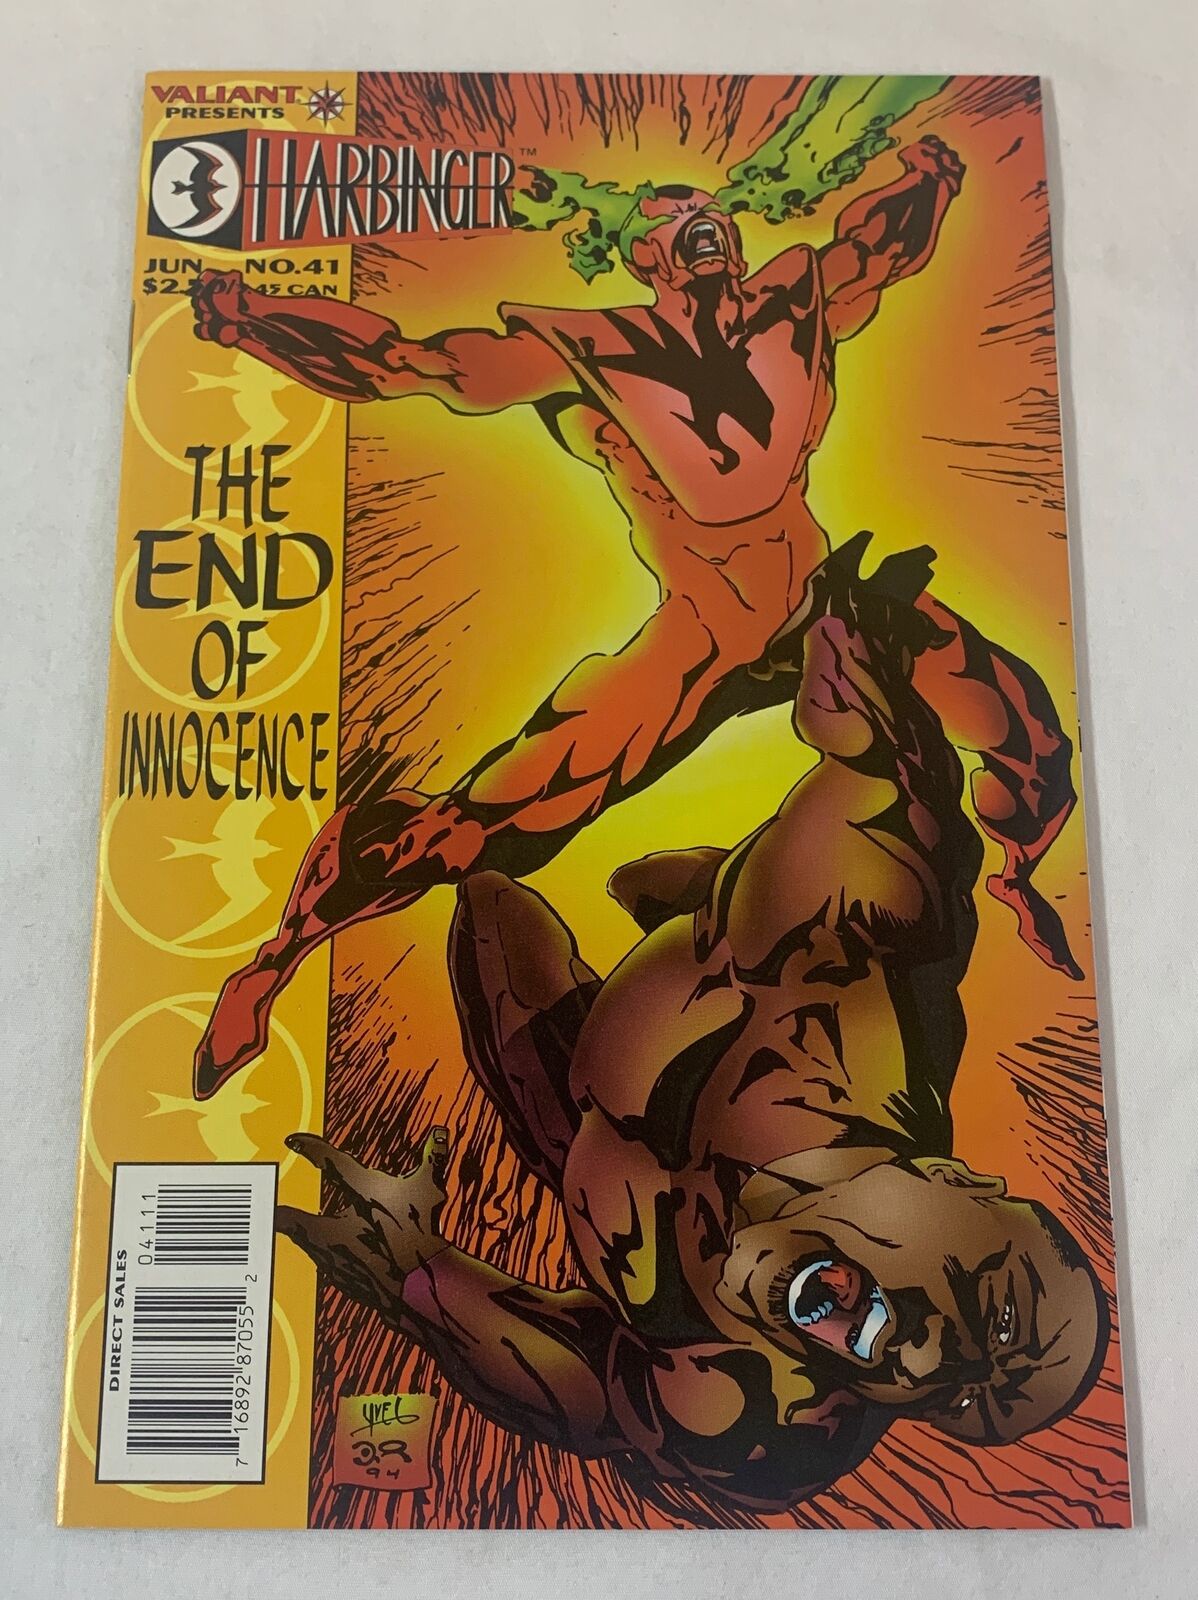 1995 HARBINGER #41 comic ~ The End of Innocence ~ last issue, low print run